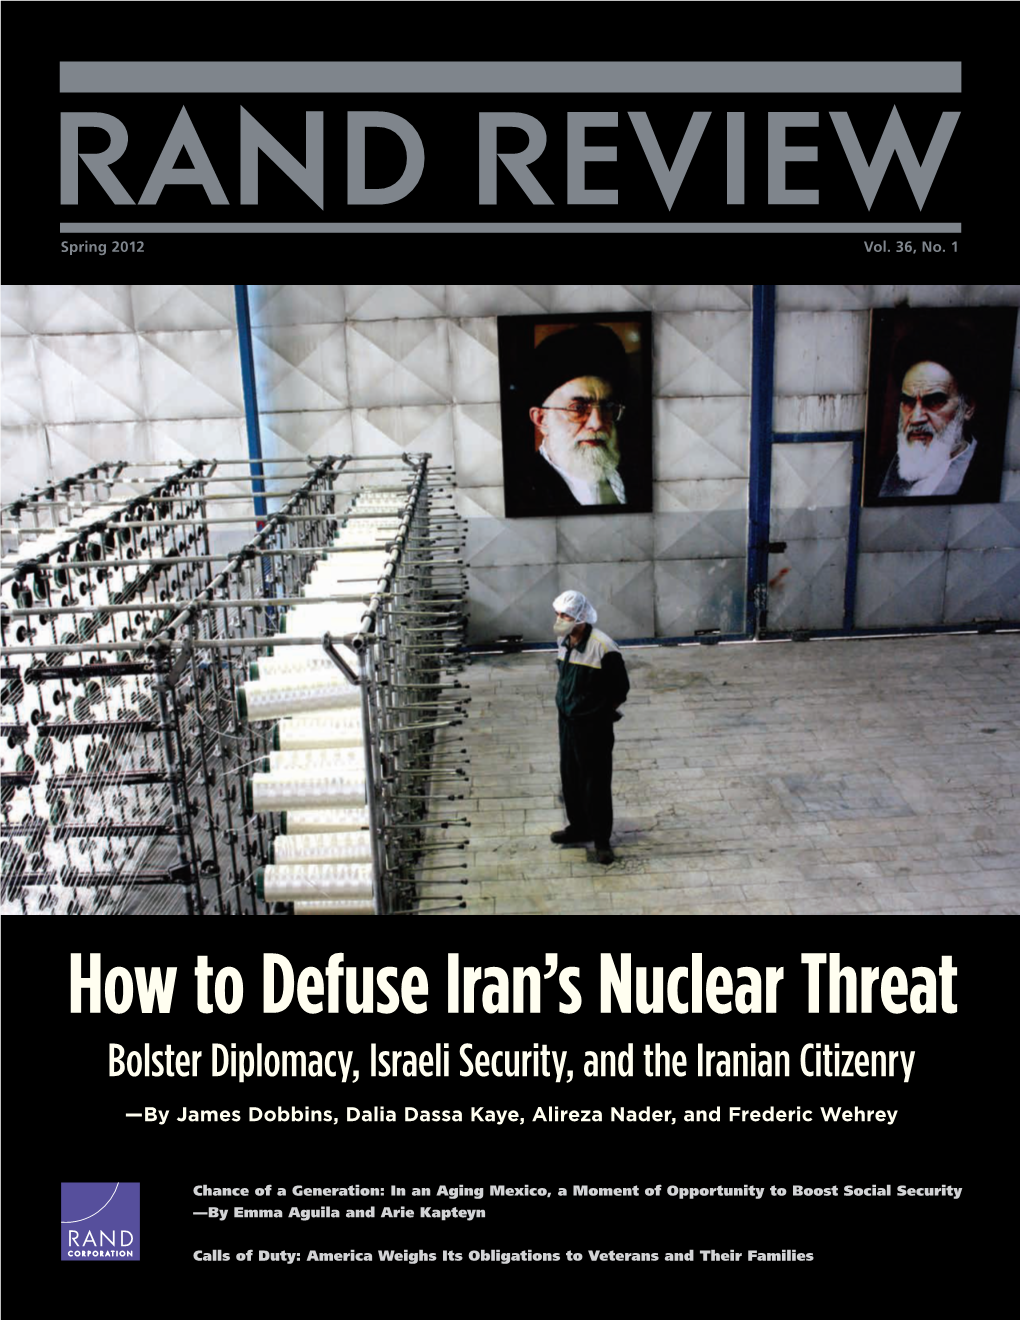 How to Defuse Iran's Nuclear Threat